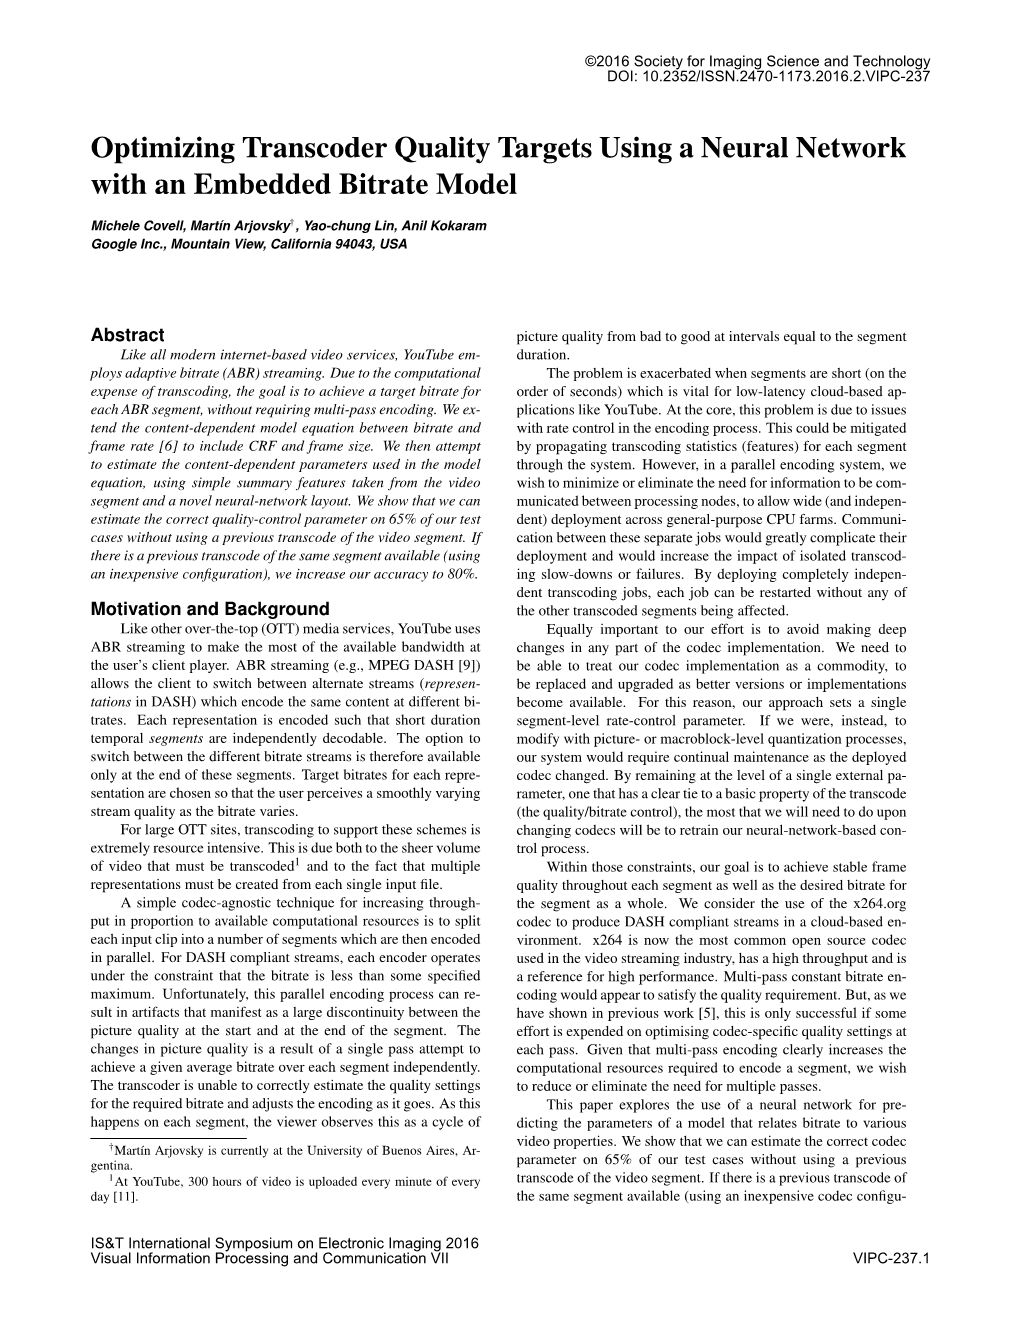 Optimizing Transcoder Quality Targets Using a Neural Network with an Embedded Bitrate Model